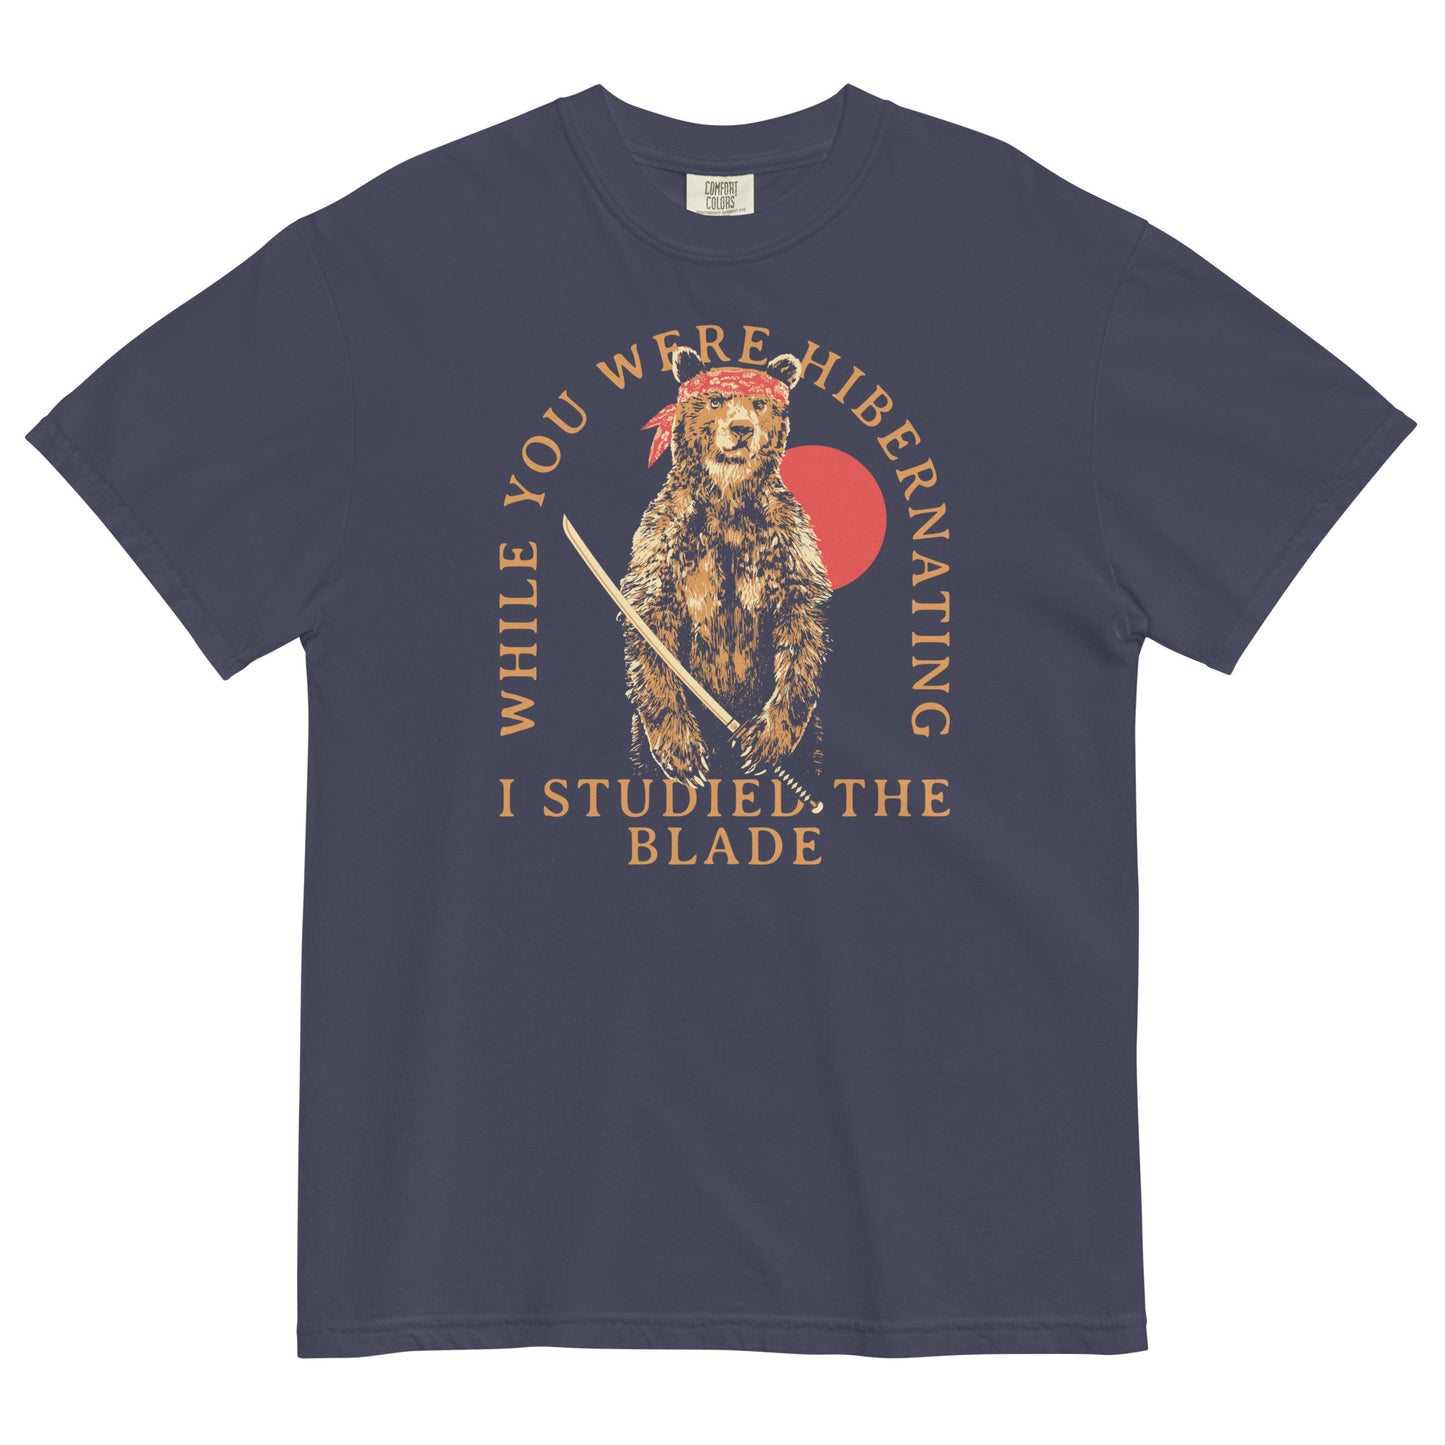 I Studied The Blade Men's Relaxed Fit Tee